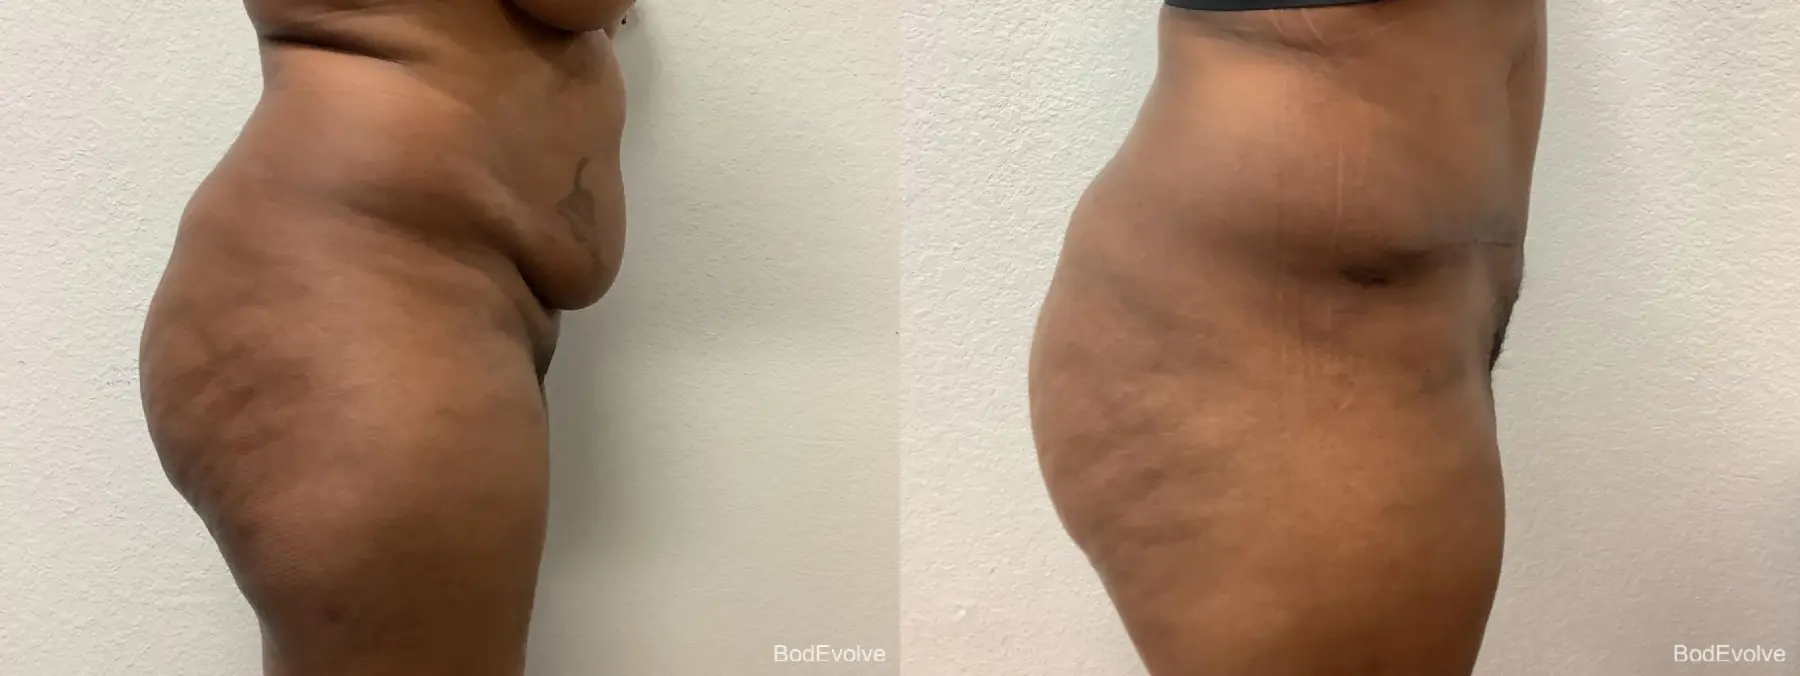 Tummy Tuck: Patient 3 - Before and After 3